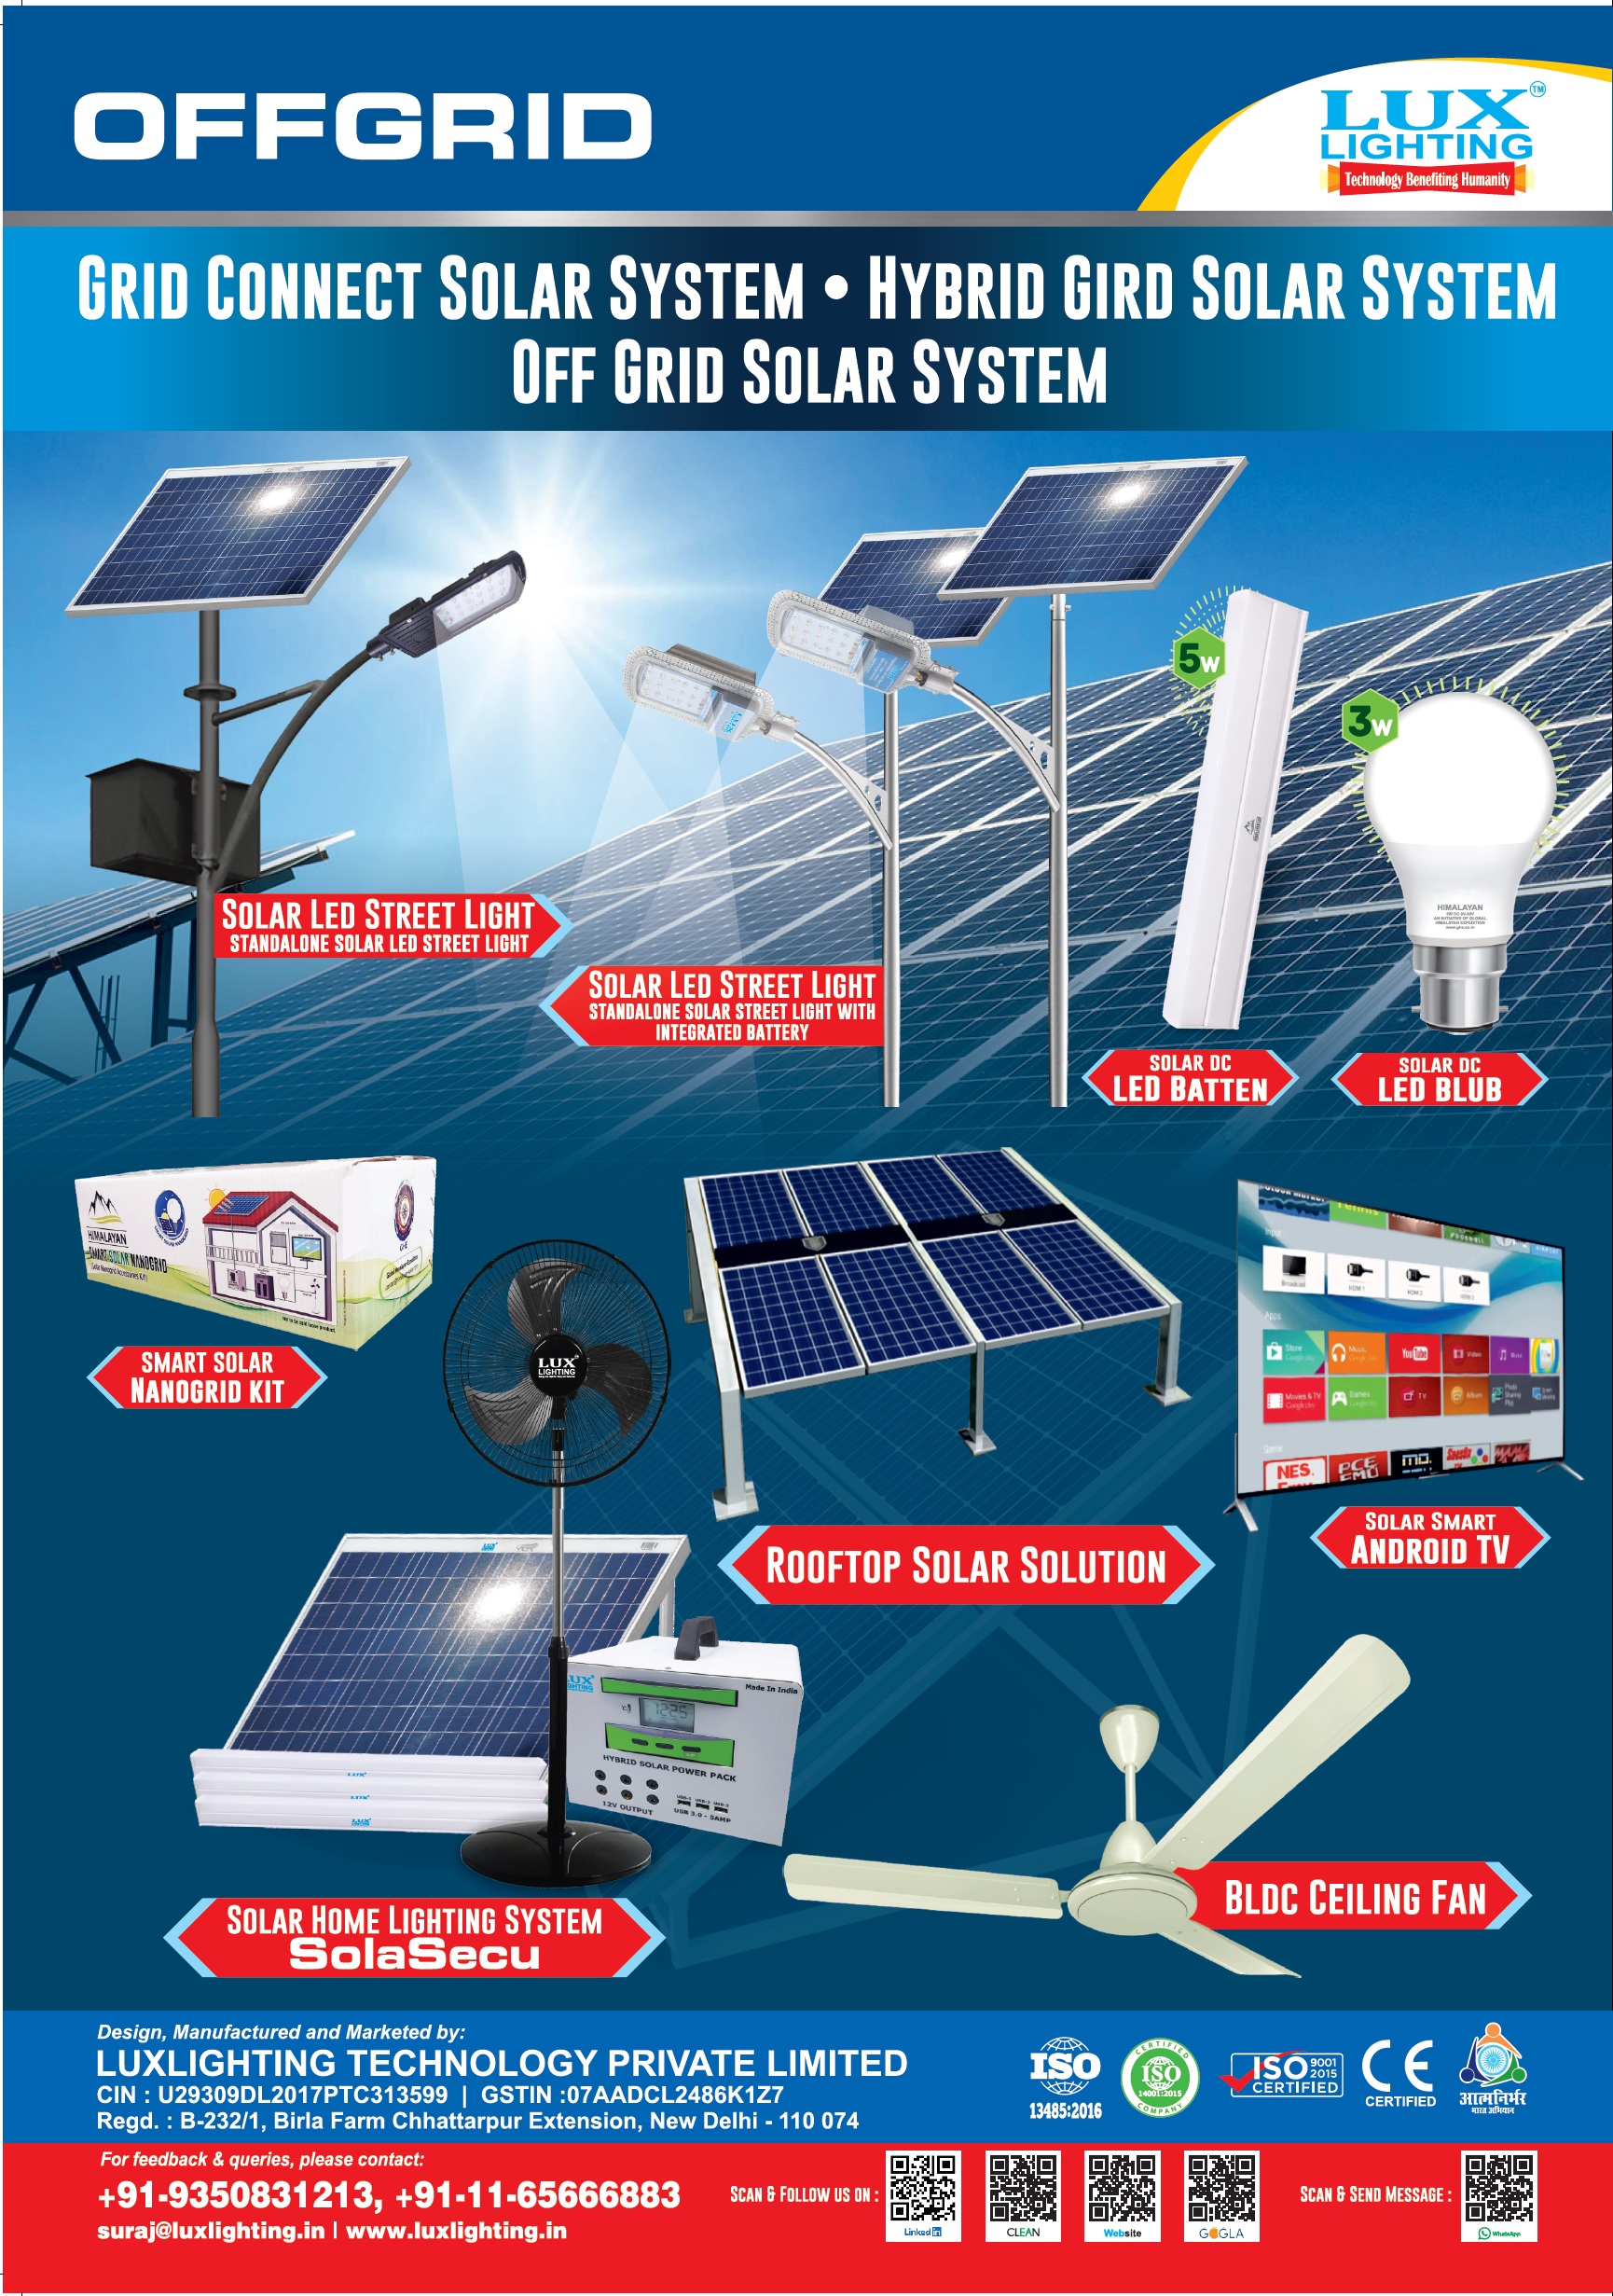 Integrated Engineering Solutions for Social Impact serve the market for to develop technologies and product solutions for social impact in sector of  Off grid.